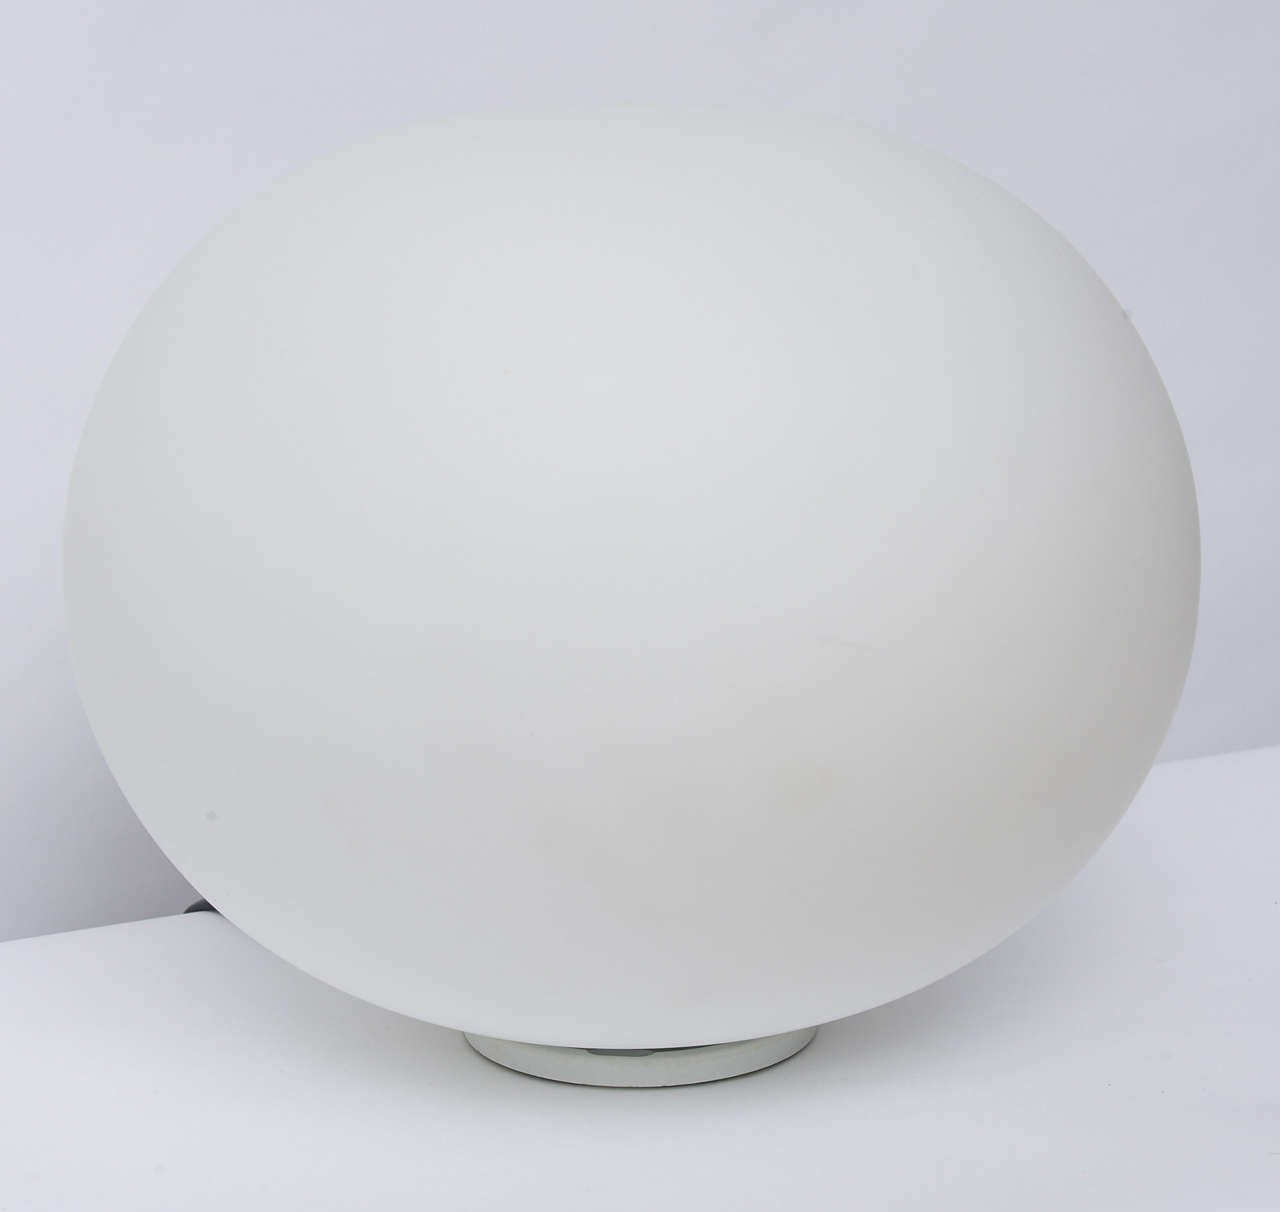 Beautiful glass and acrylic ball lamp by Jasper Morison for Flos 1990s.